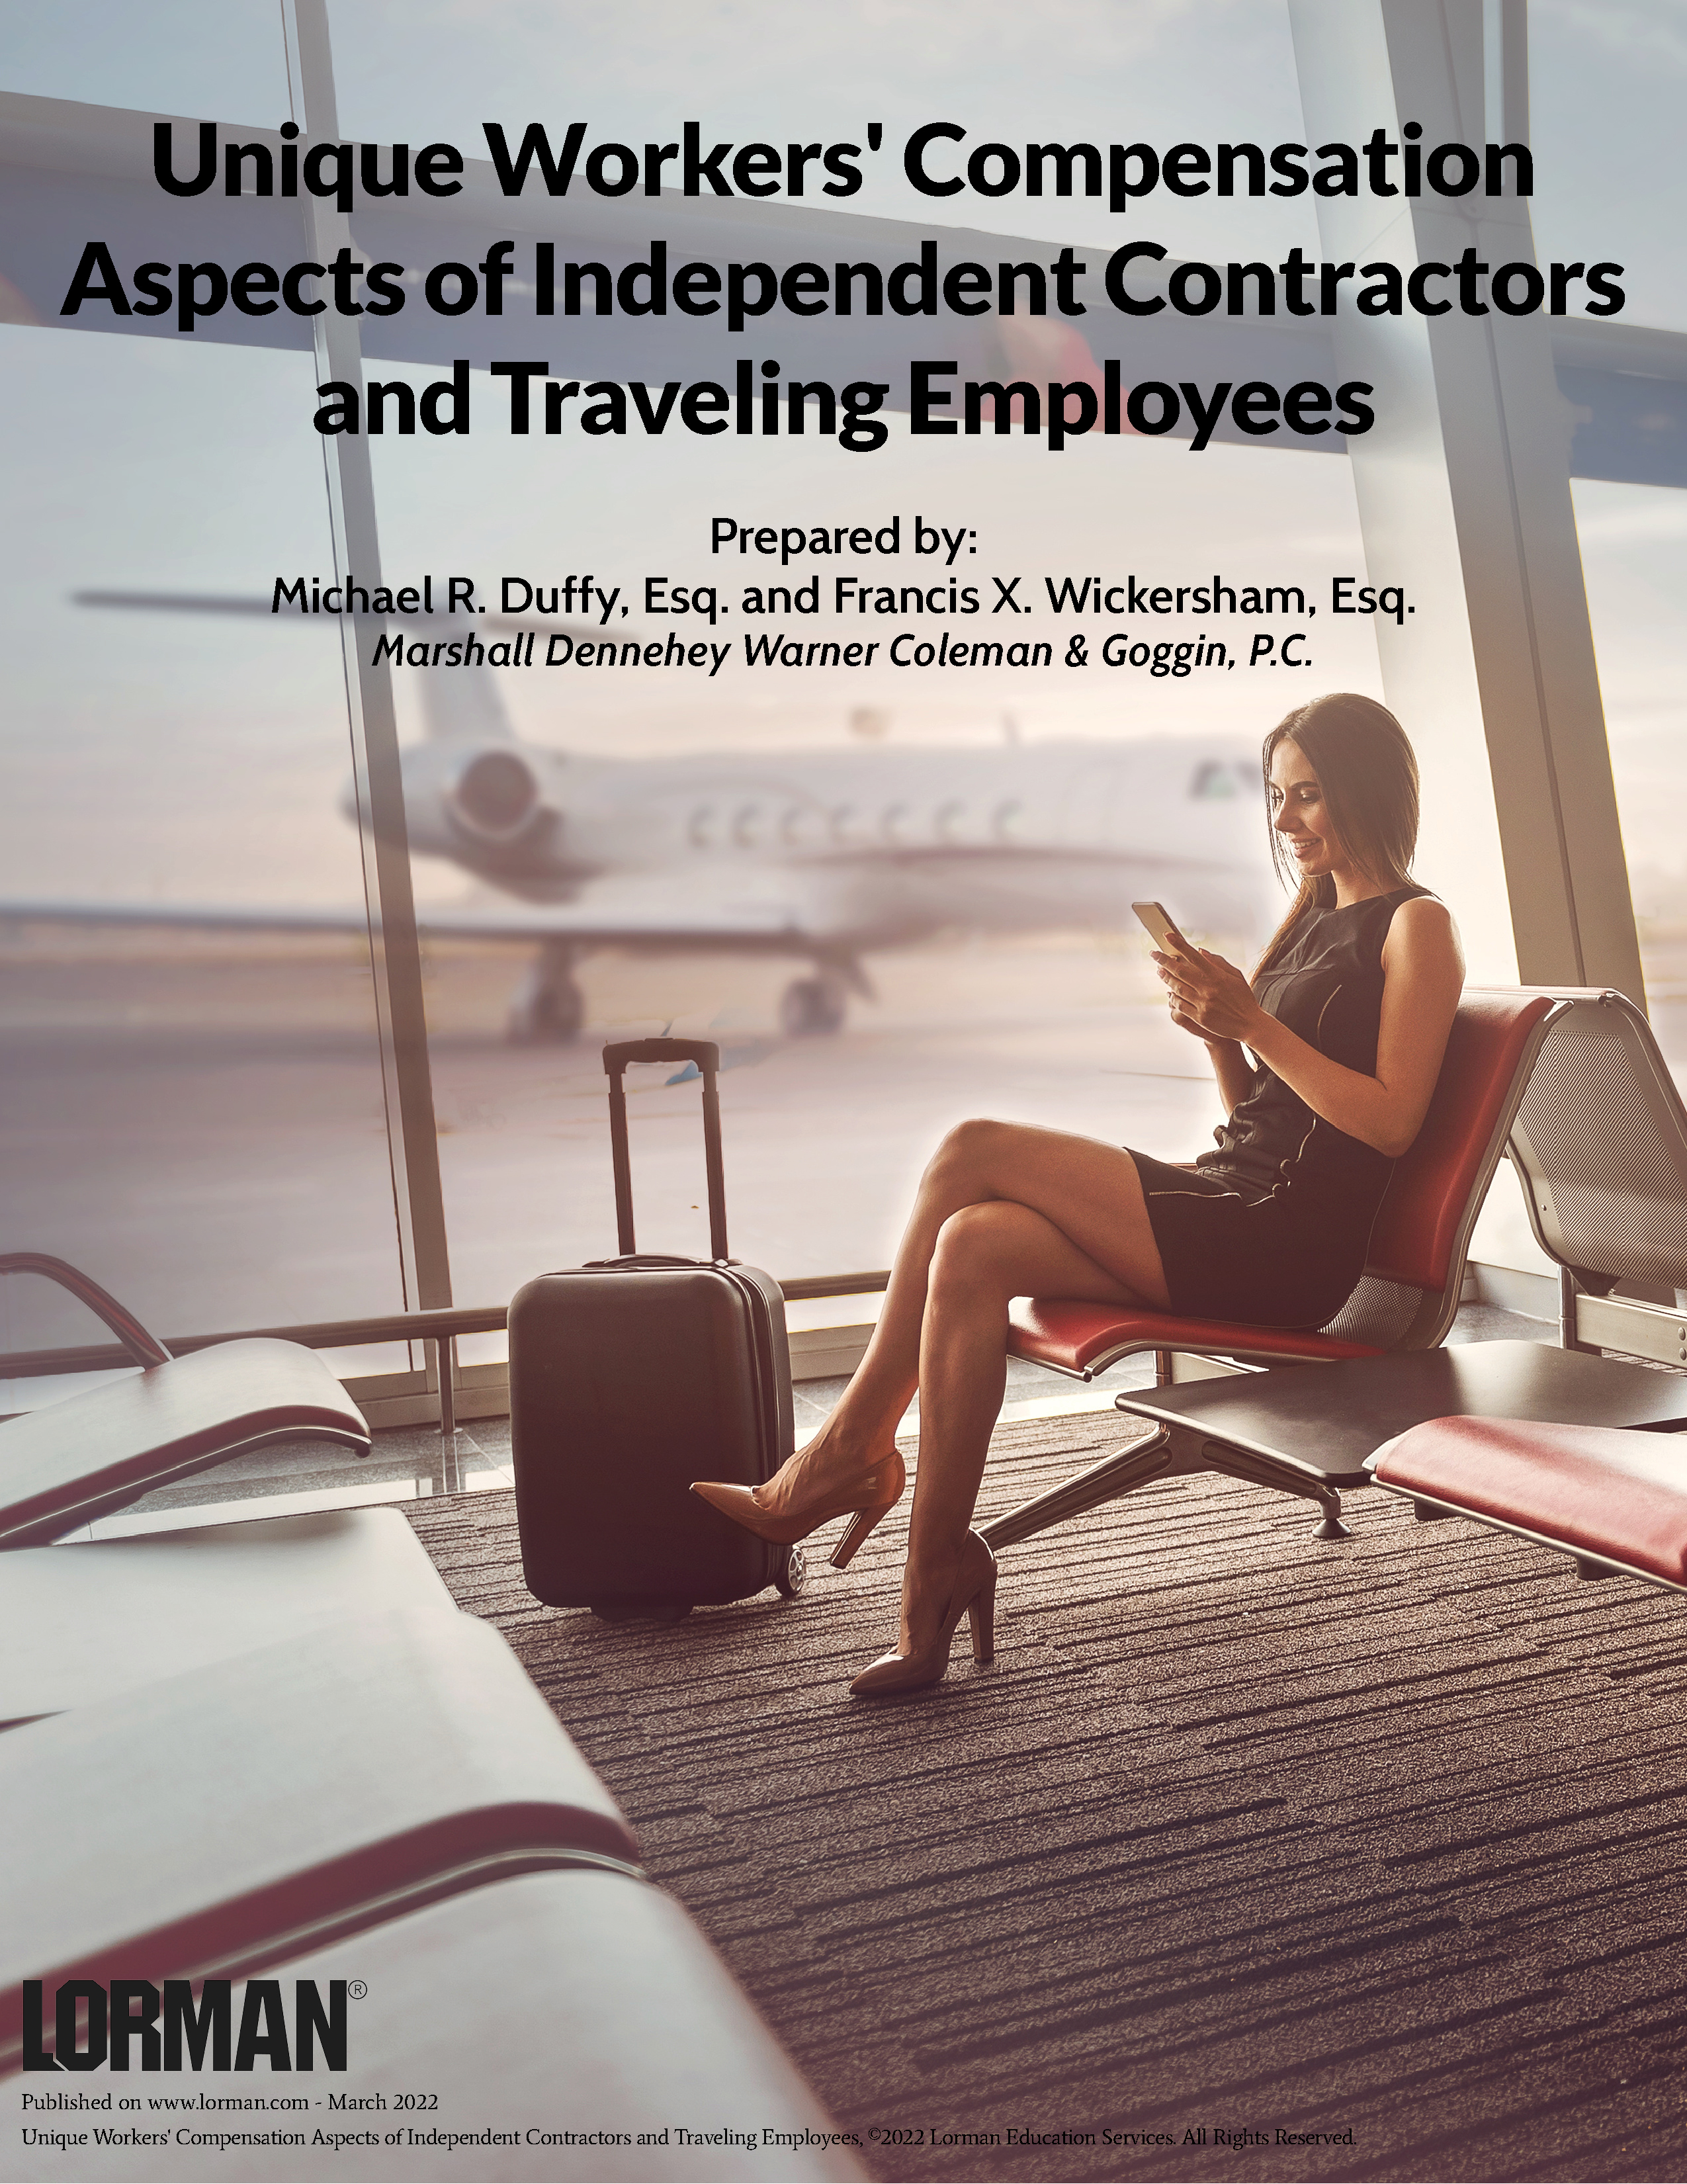 Unique Workers' Compensation Aspects of Independent Contractors and Traveling Employees